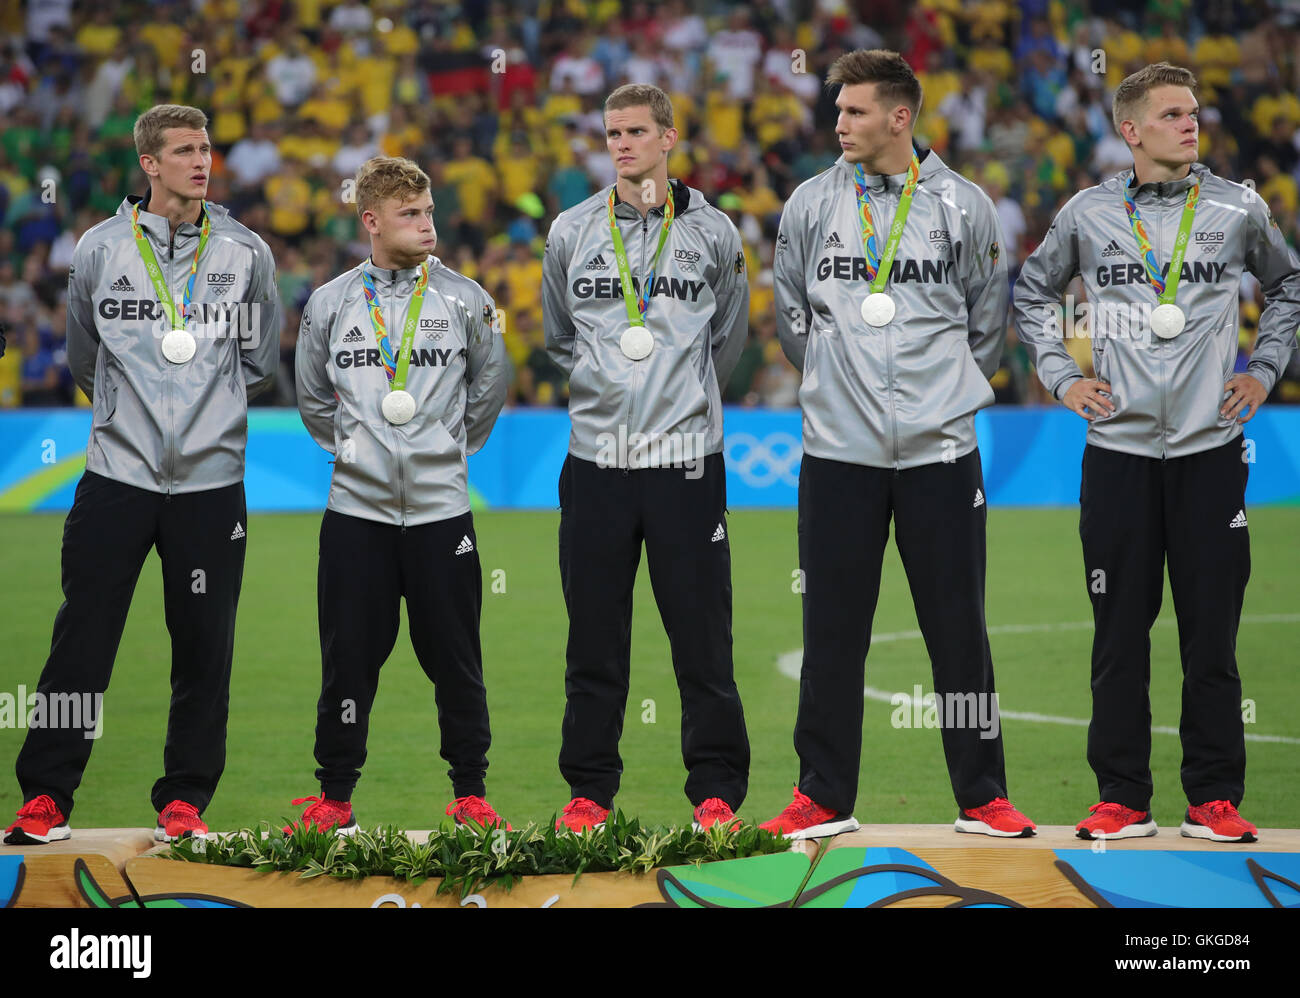 Rio de Janeiro, Brazil. 20th Aug, 2016. Silver medalist (L-R) Sven Bender, Maximilian Meyer, Lars Bender, Niklas Suele, Matthias Ginter of Germany reacts during the medal ceremony after losing the Men's soccer Gold Medal Match between Brazil and Germany during the Rio 2016 Olympic Games at the Maracana in Rio de Janeiro, Brazil, 20 August 2016. Photo: Friso Gentsch/dpa/Alamy Live News Stock Photo